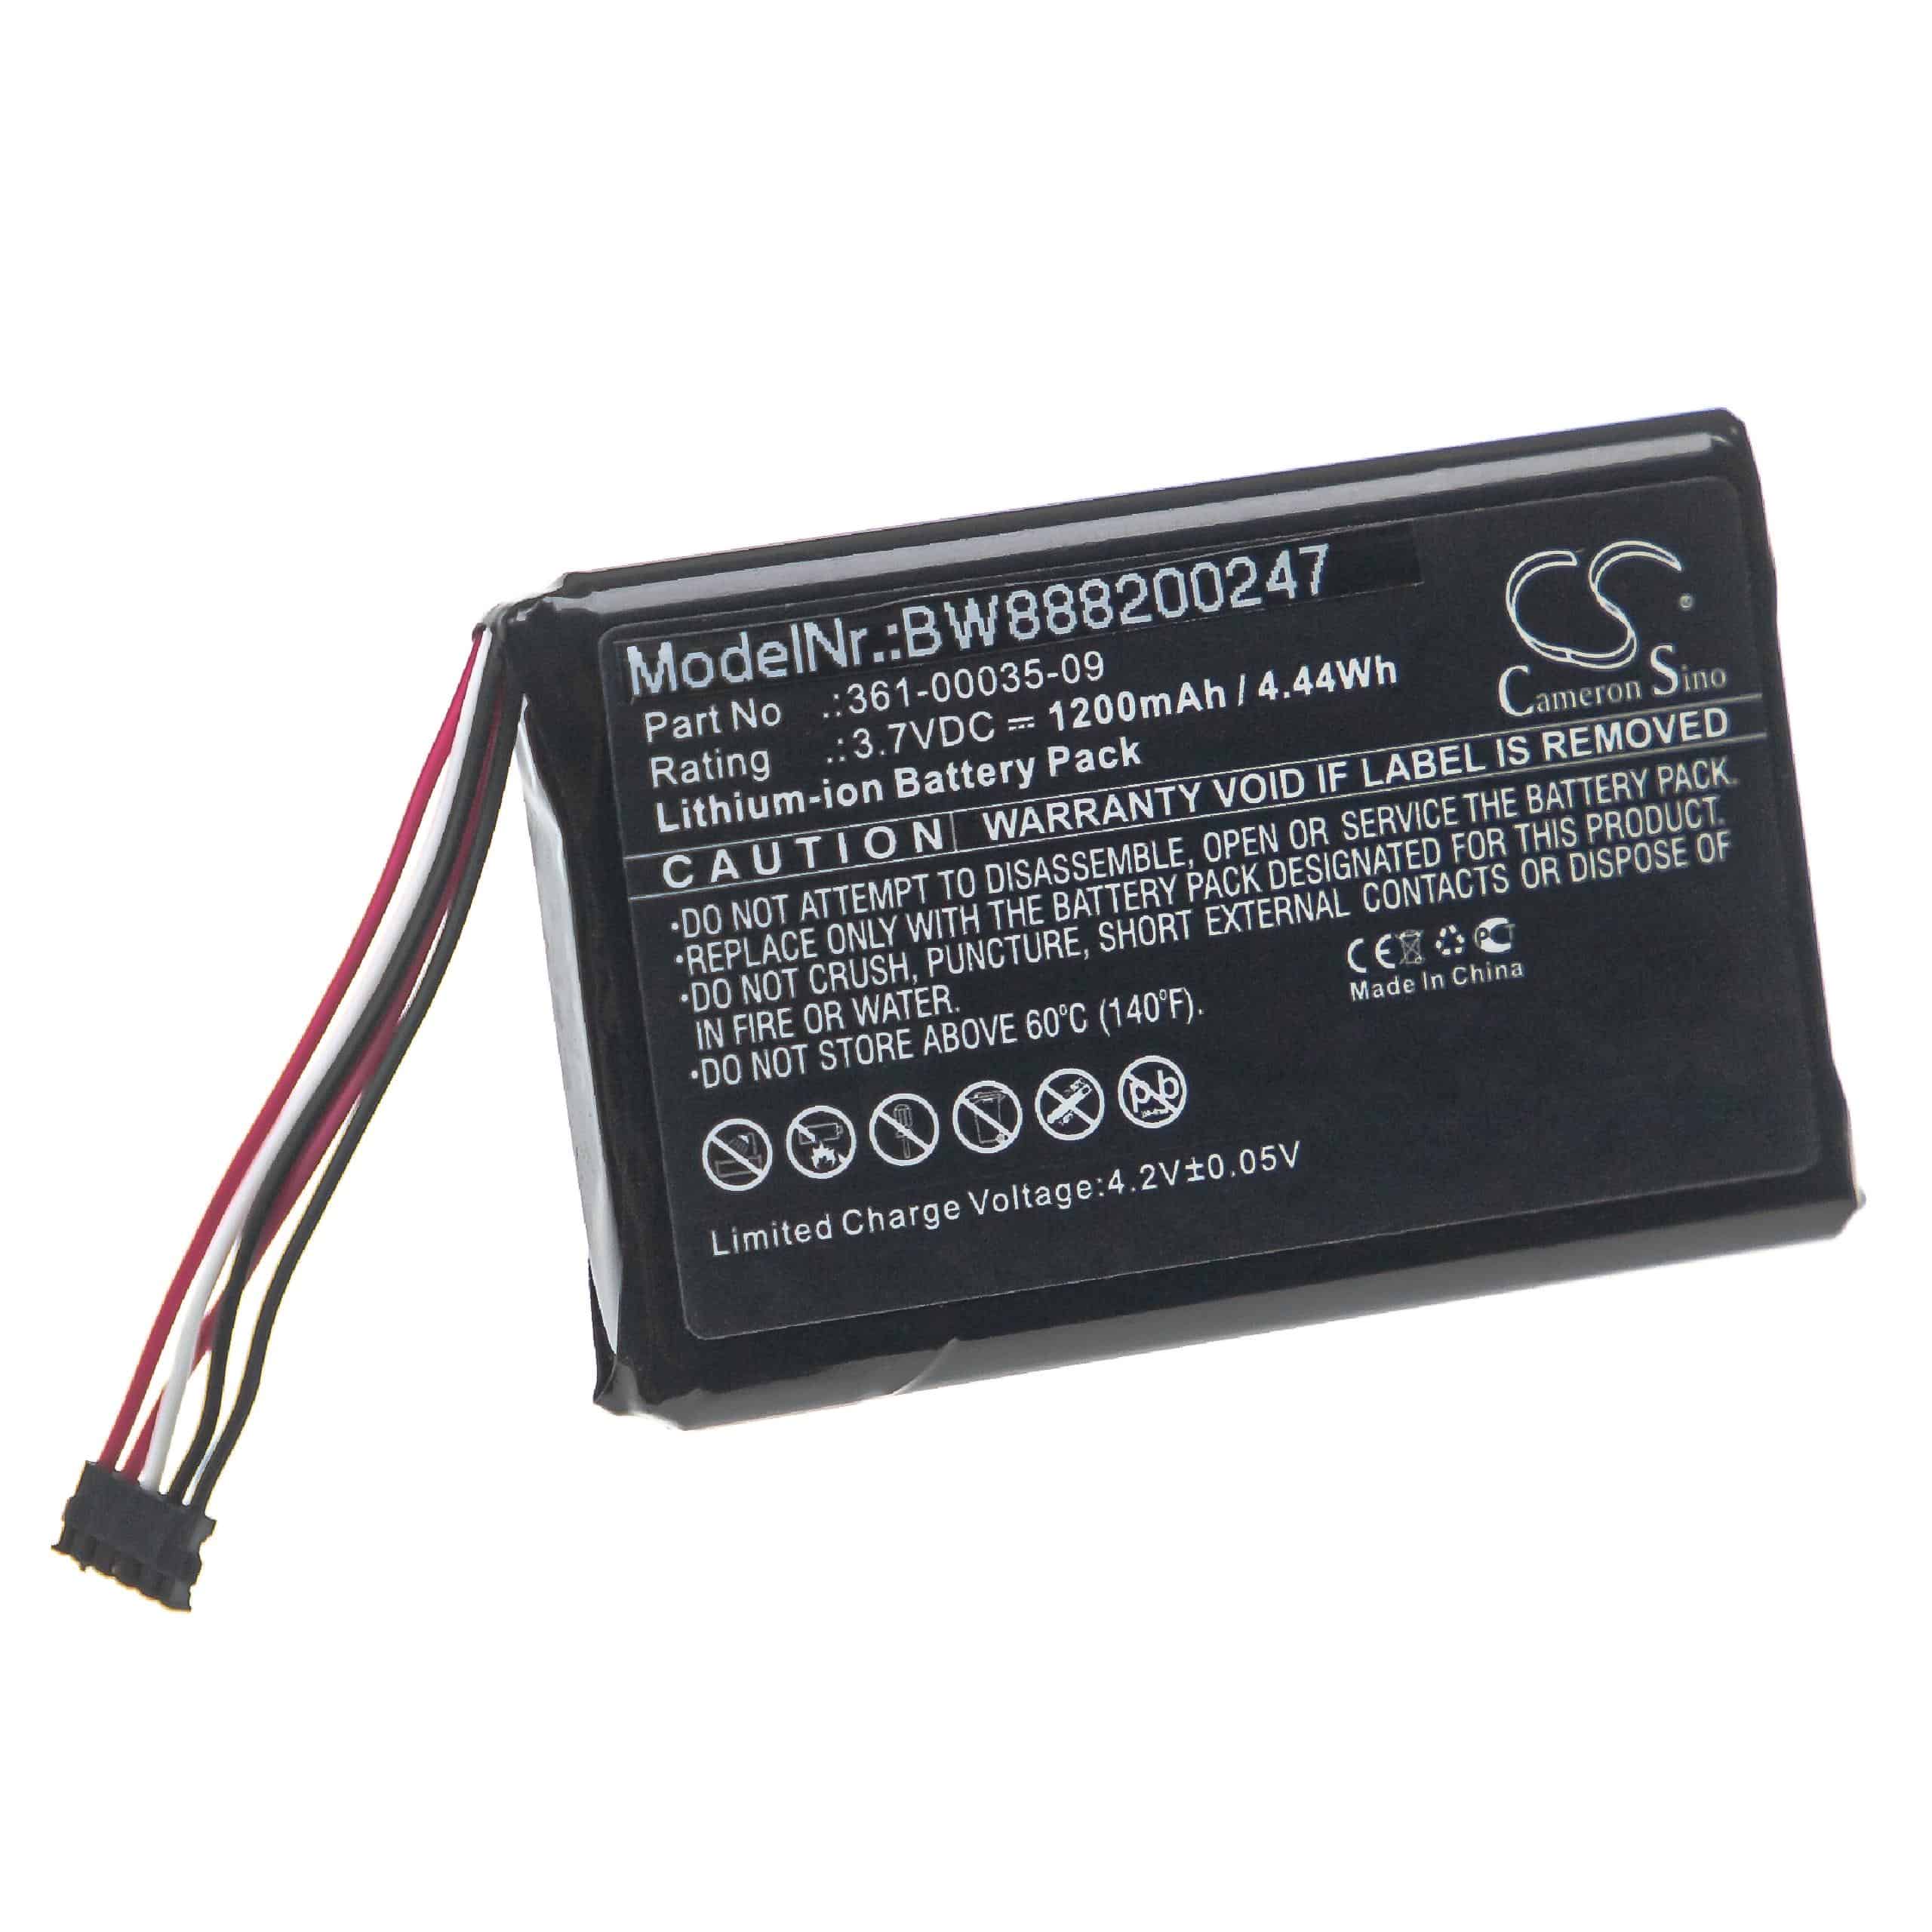 Dog Trainer Battery Replacement for Garmin 361-00035-09, 351-00035-09, 010-11828-40 - 1200mAh 3.7V Li-Ion